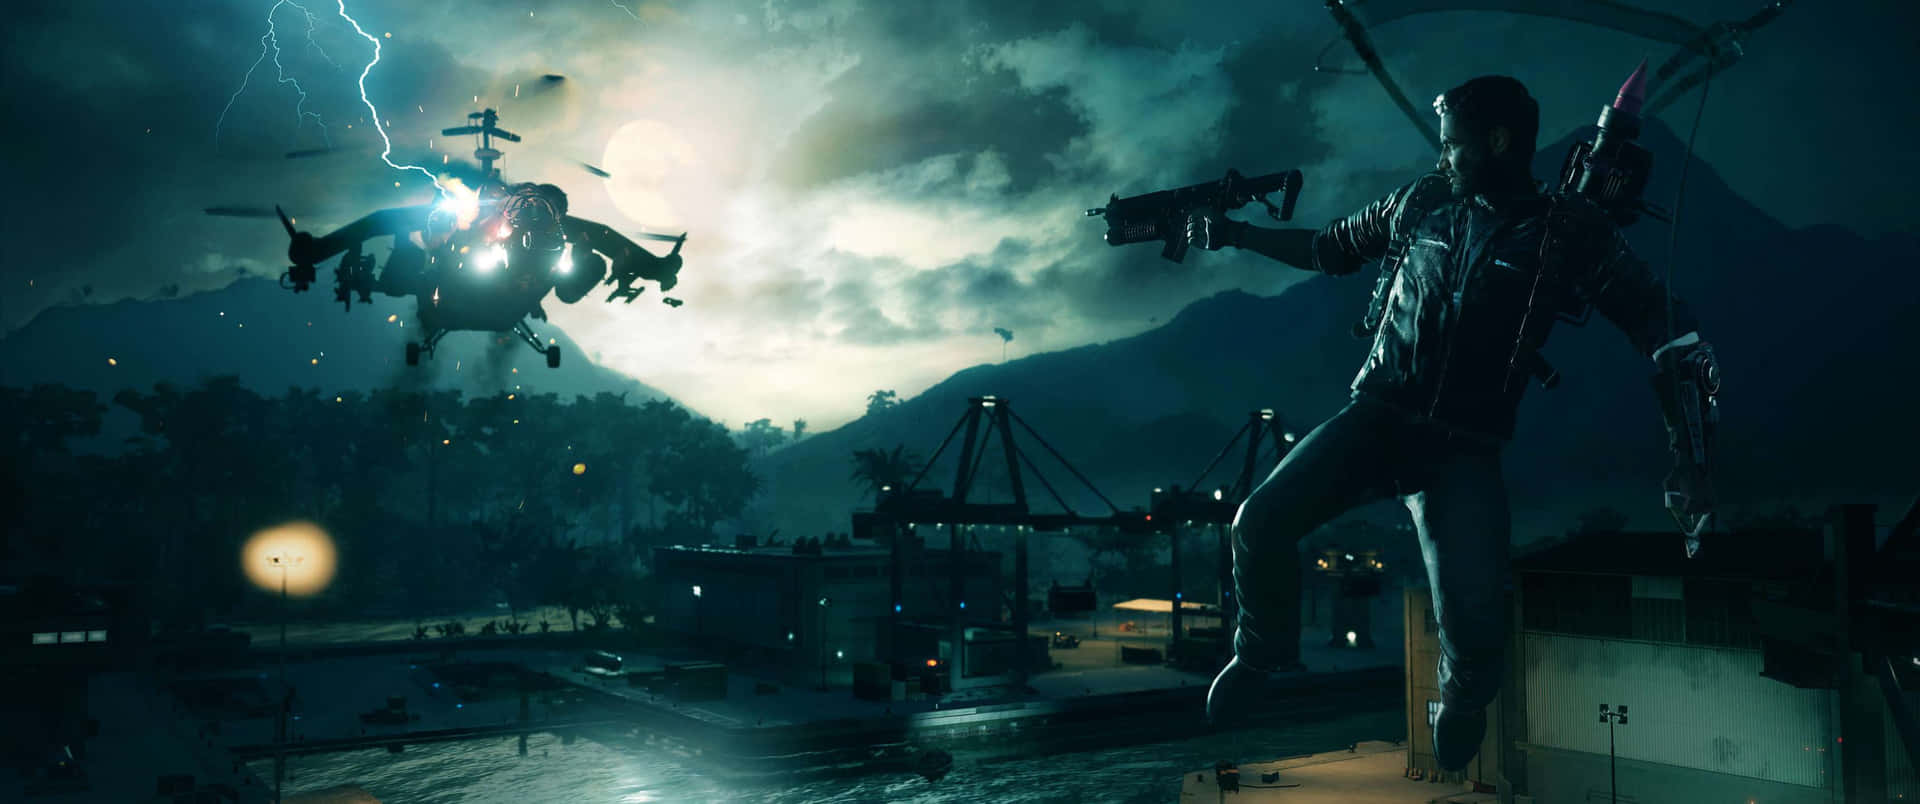 3440x1440p Just Cause 4 Battle At Night Background